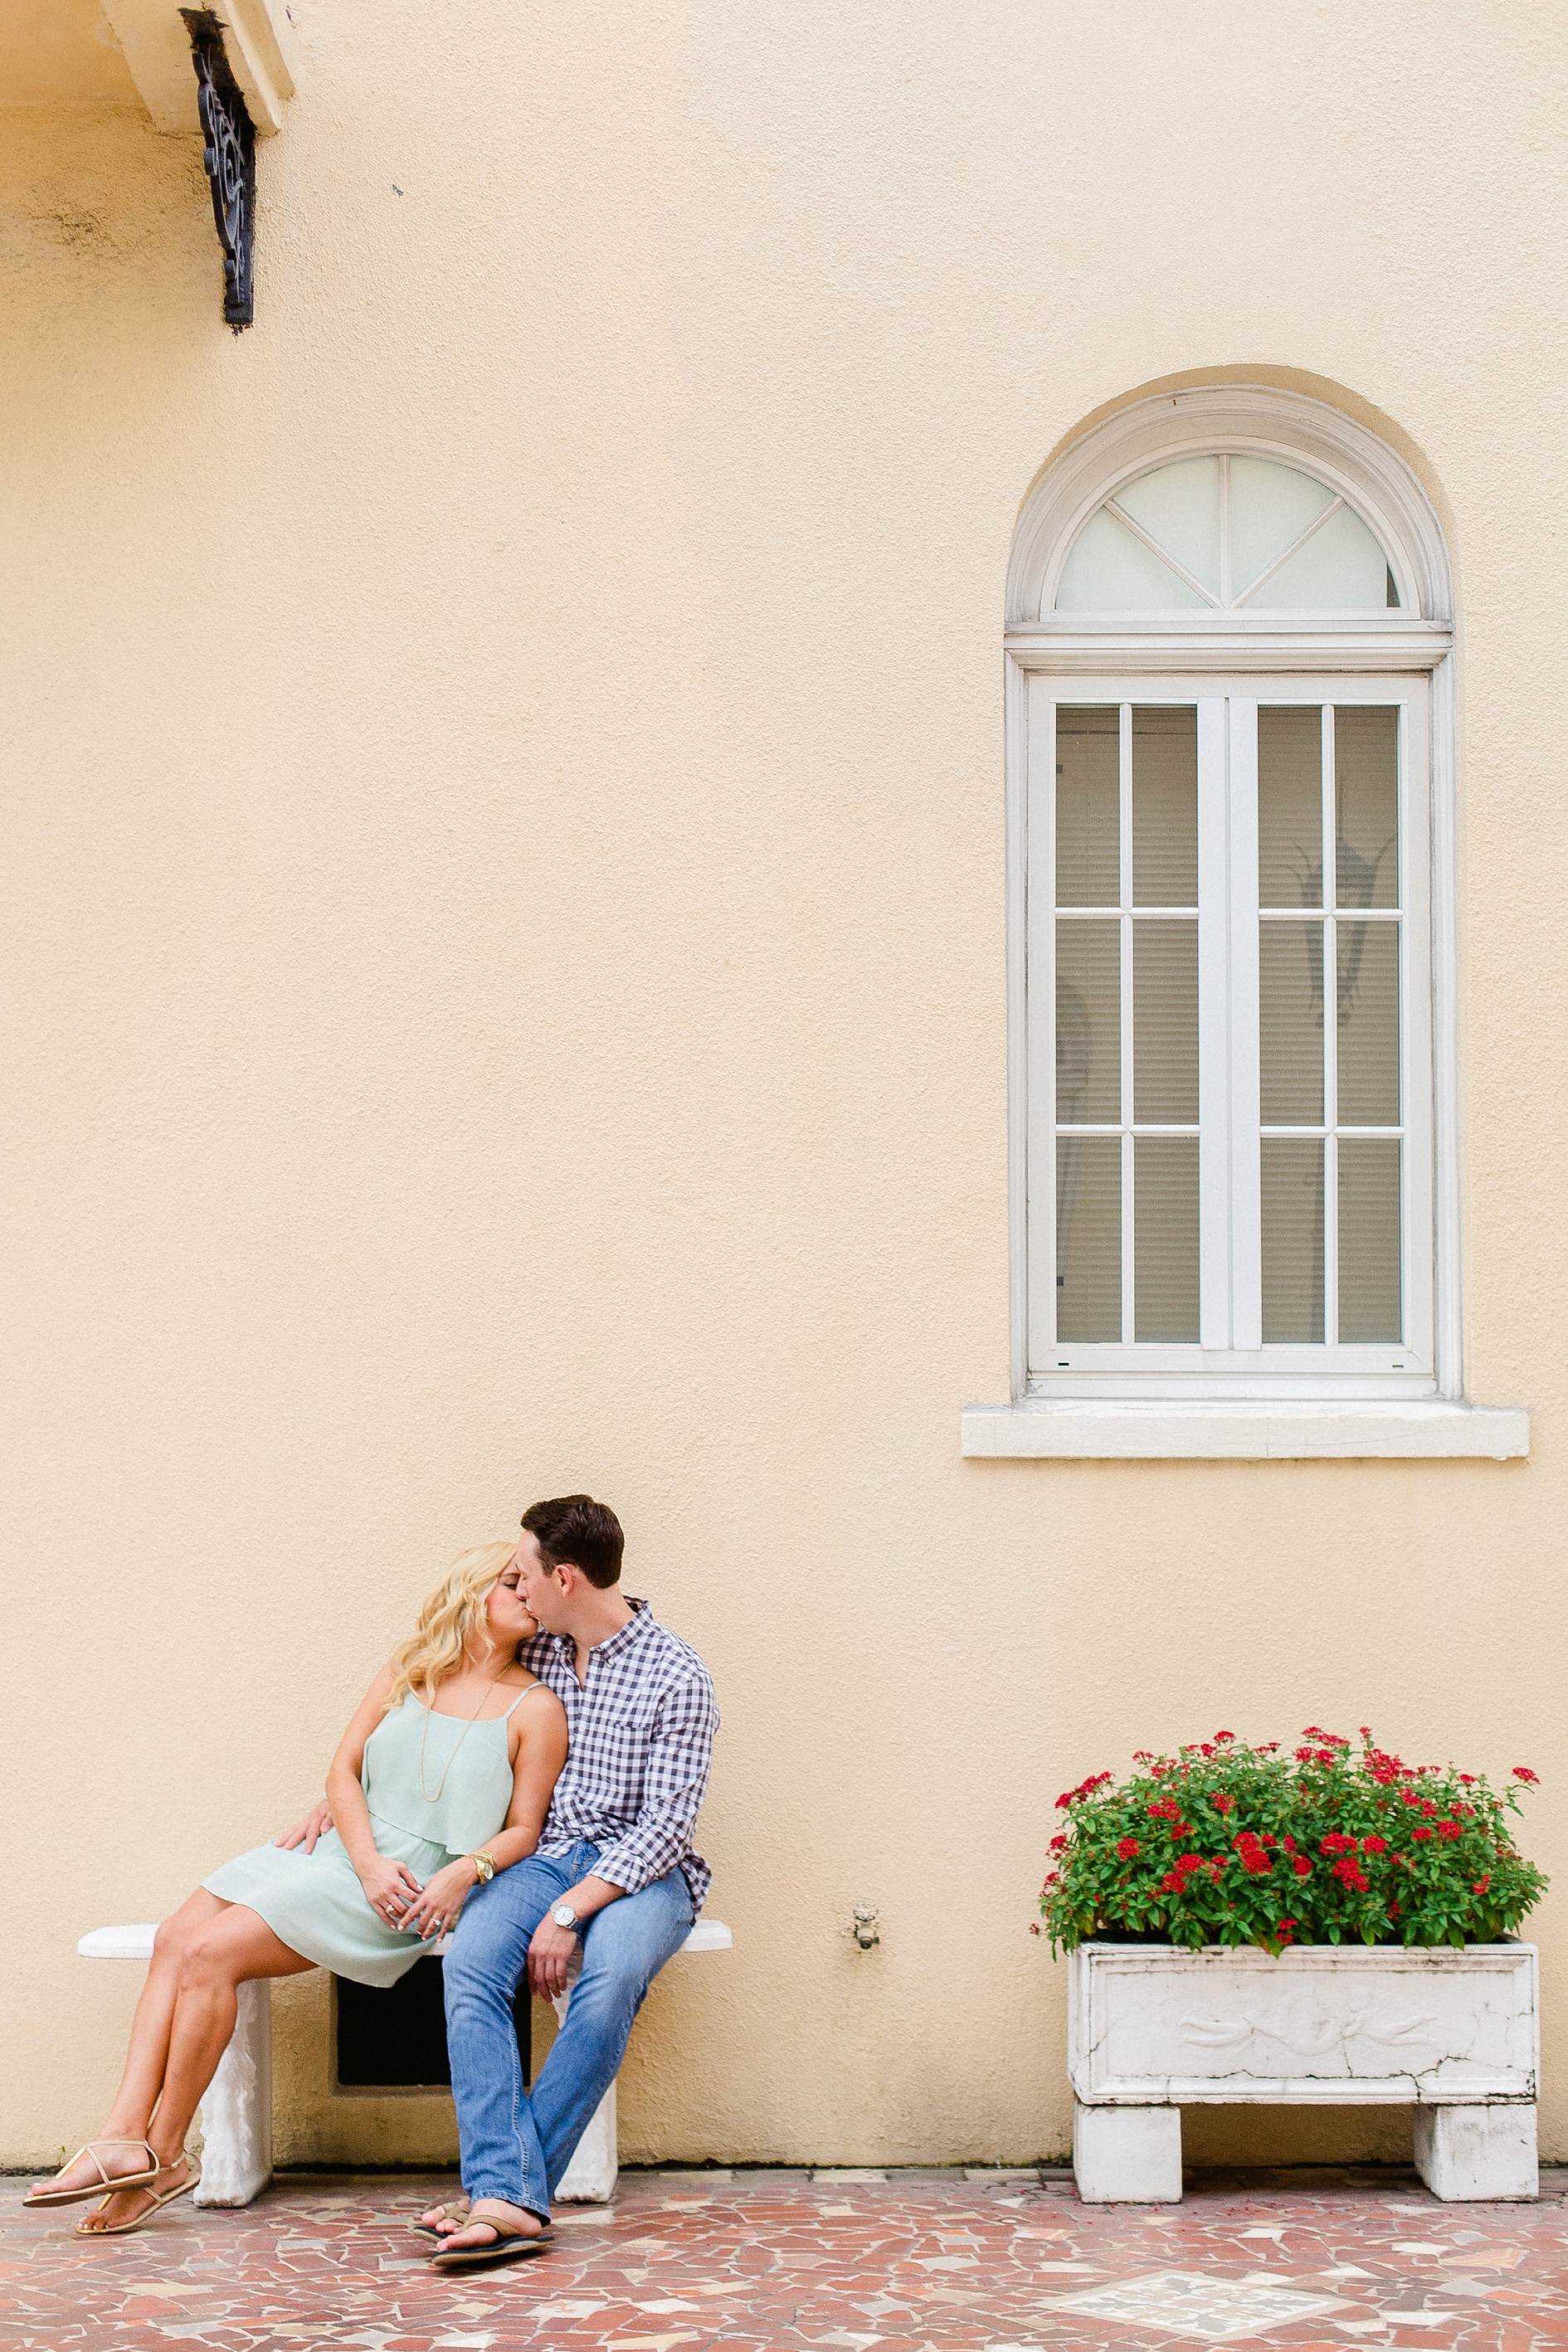 Tampa Yacht Club Engagement | © Ailyn La Torre Photography 2015